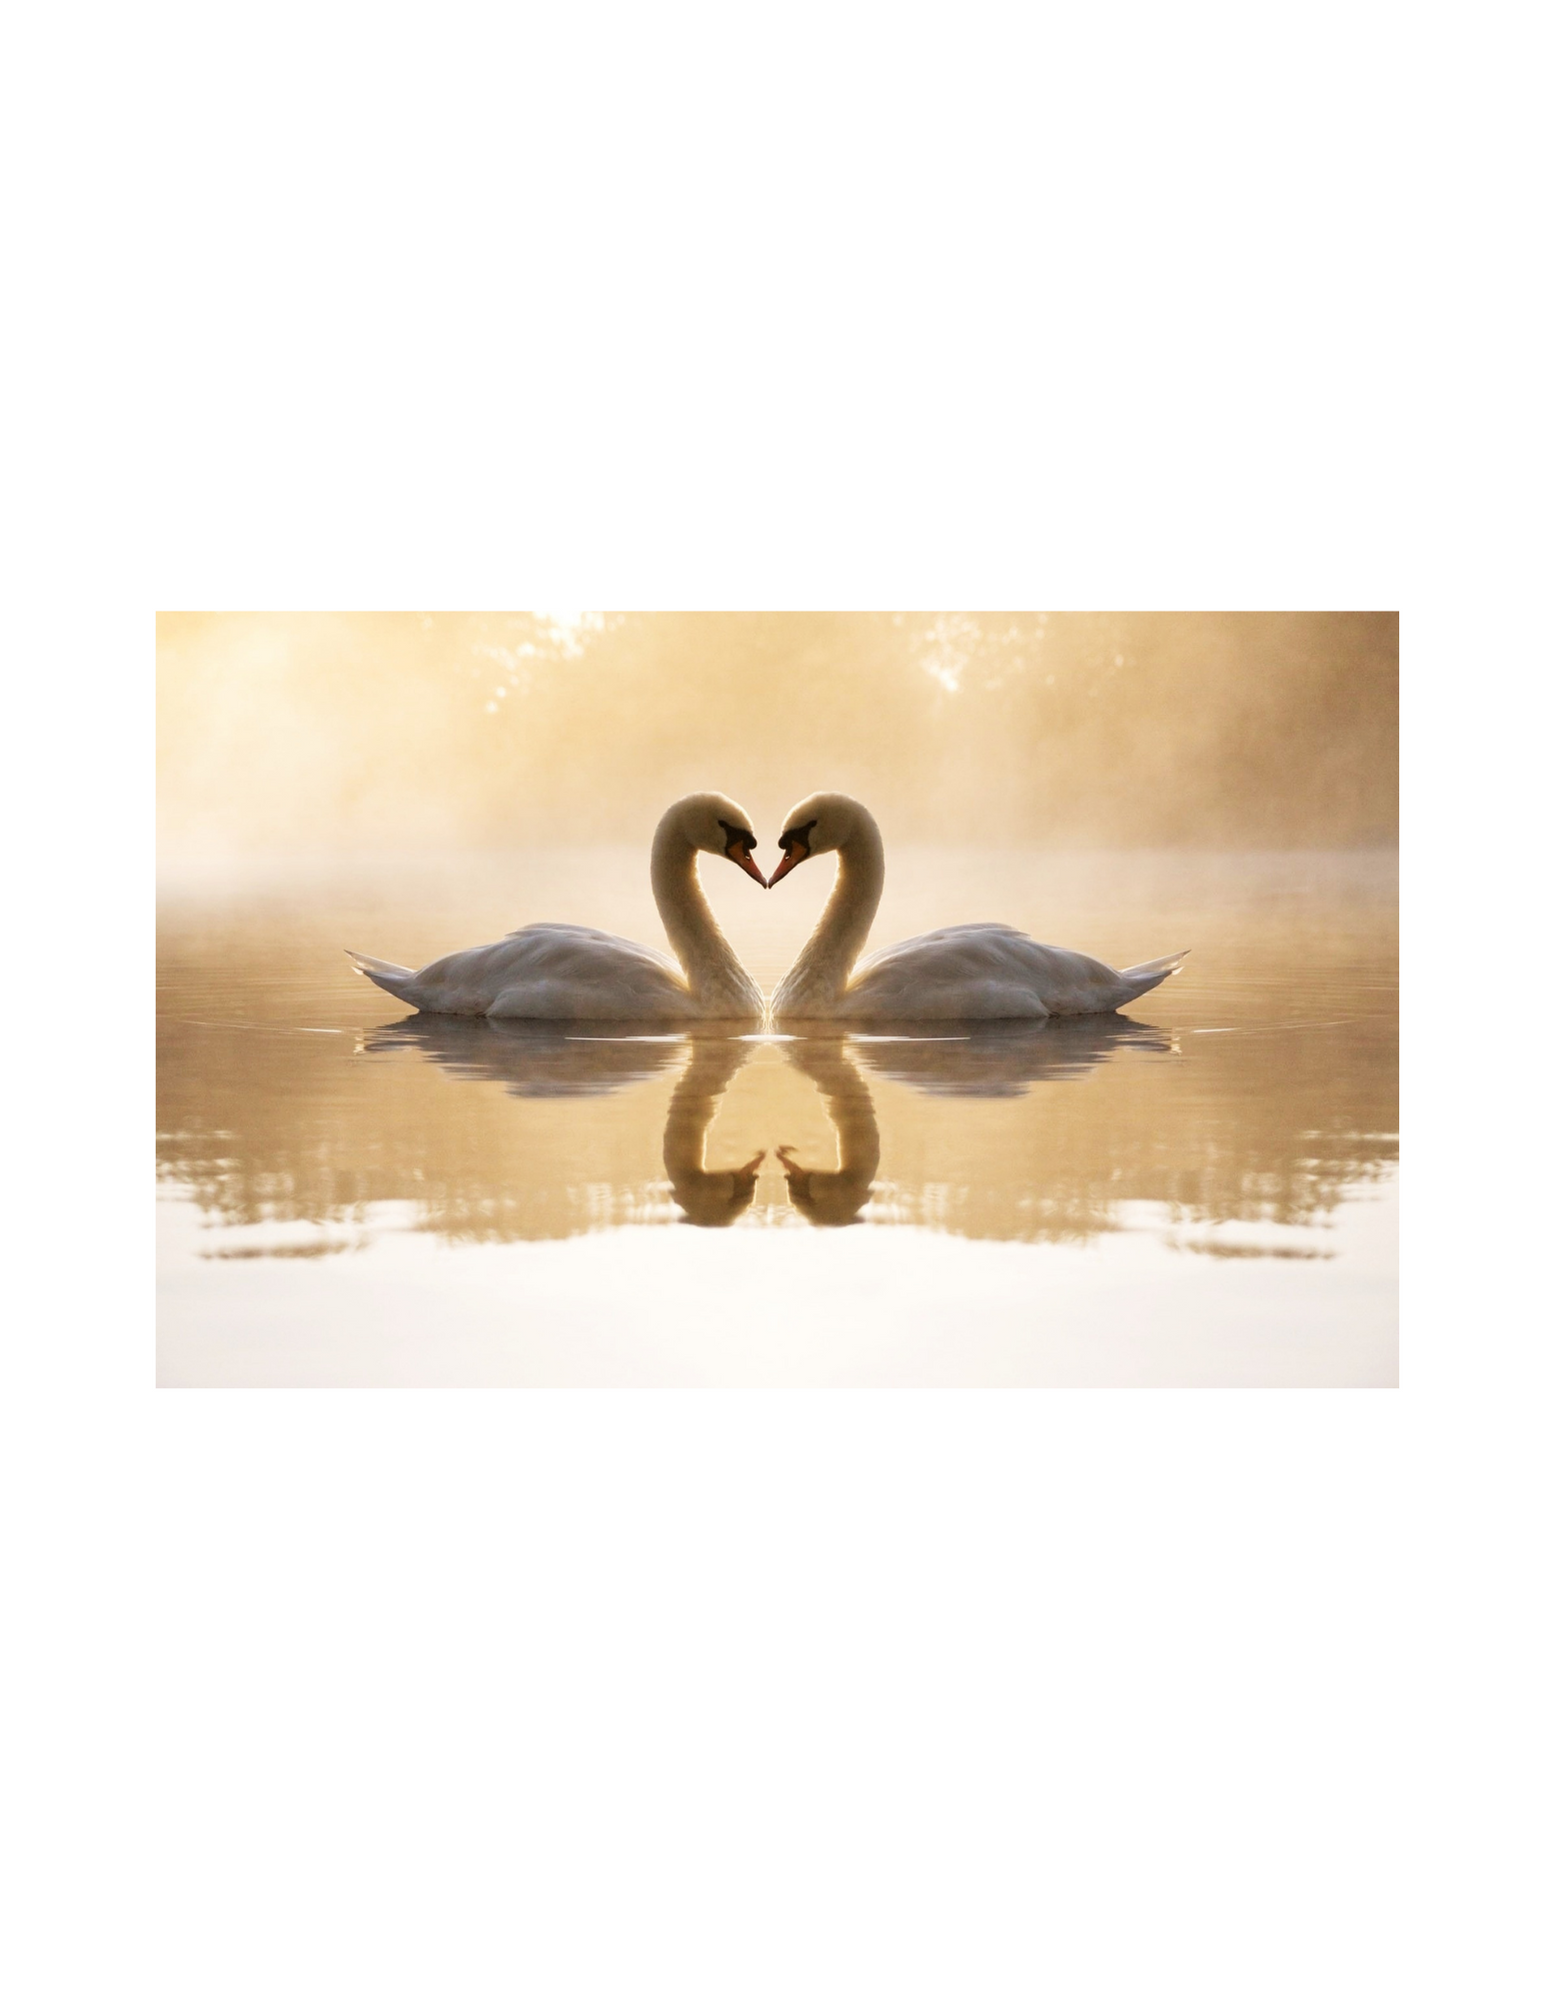 Greeting Cards (Swans)